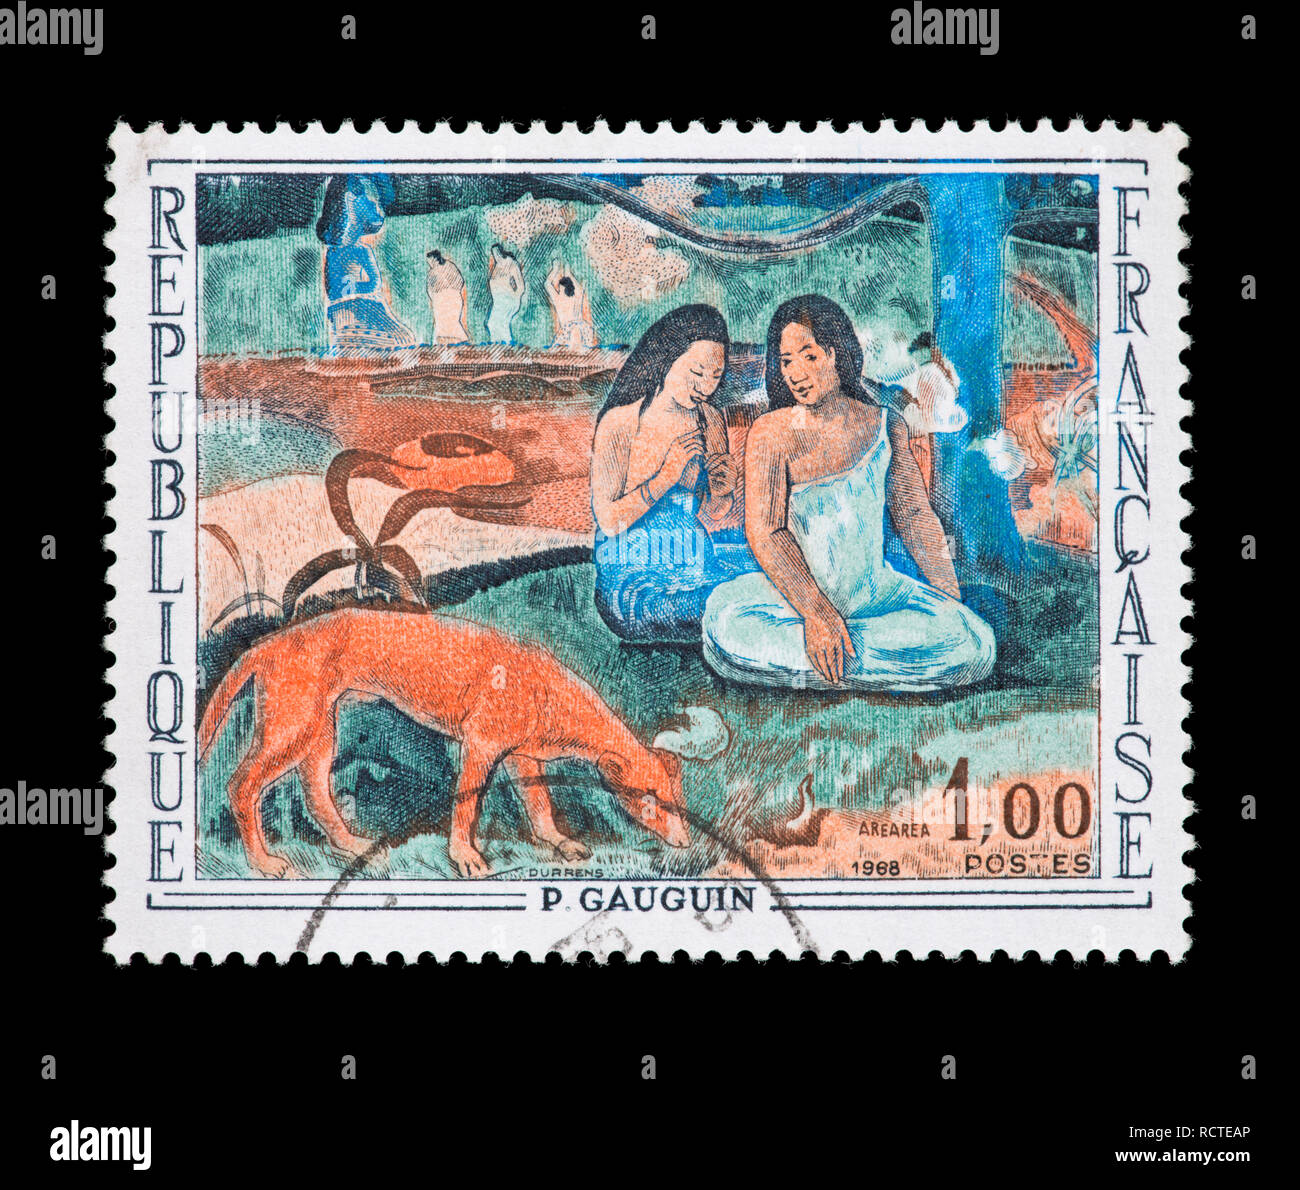 Postage stamp from France depicting the Paul Gauguin painting 'Arearea (Merriment)' Stock Photo